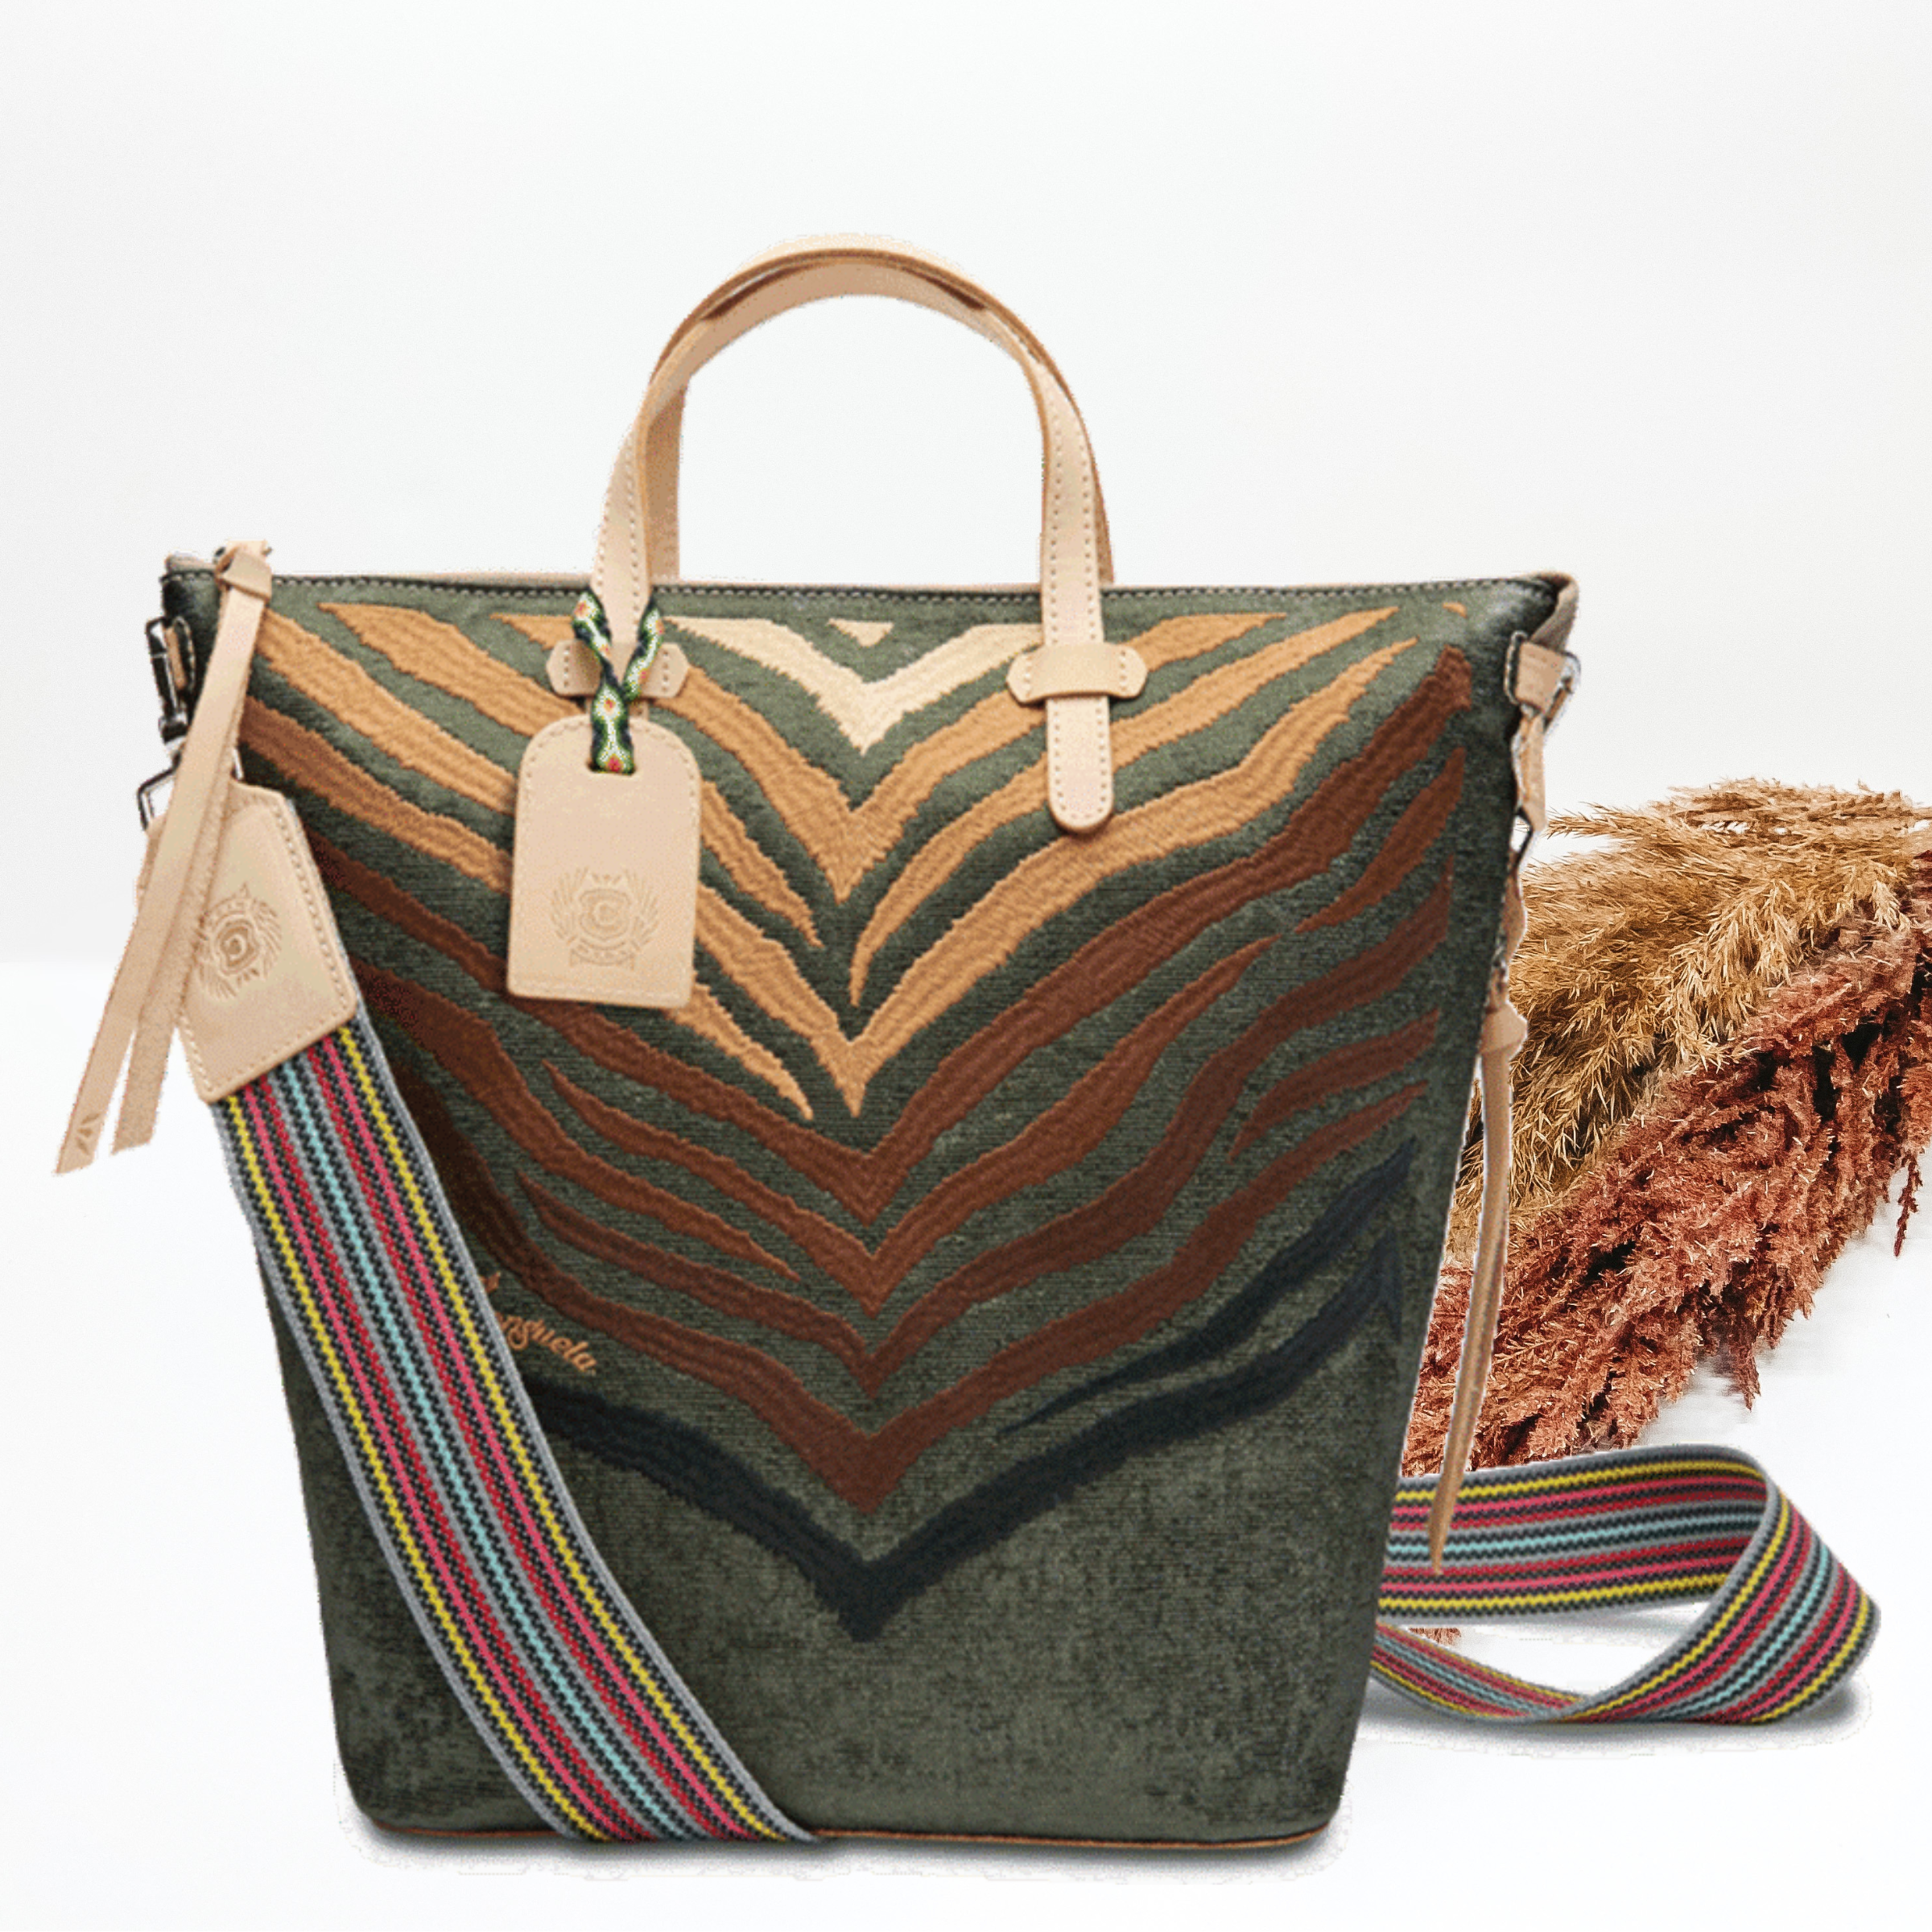 This bag has a smaller base with a wider top. This is a dark green bag that has an embroidered zebra print. The zebra print goes from an ivory color to a black color. This bag has small, leather tan handles at the top and a striped strap on the sides. This bag is pictured on a white background with tan and brown pompous grass in the background. 